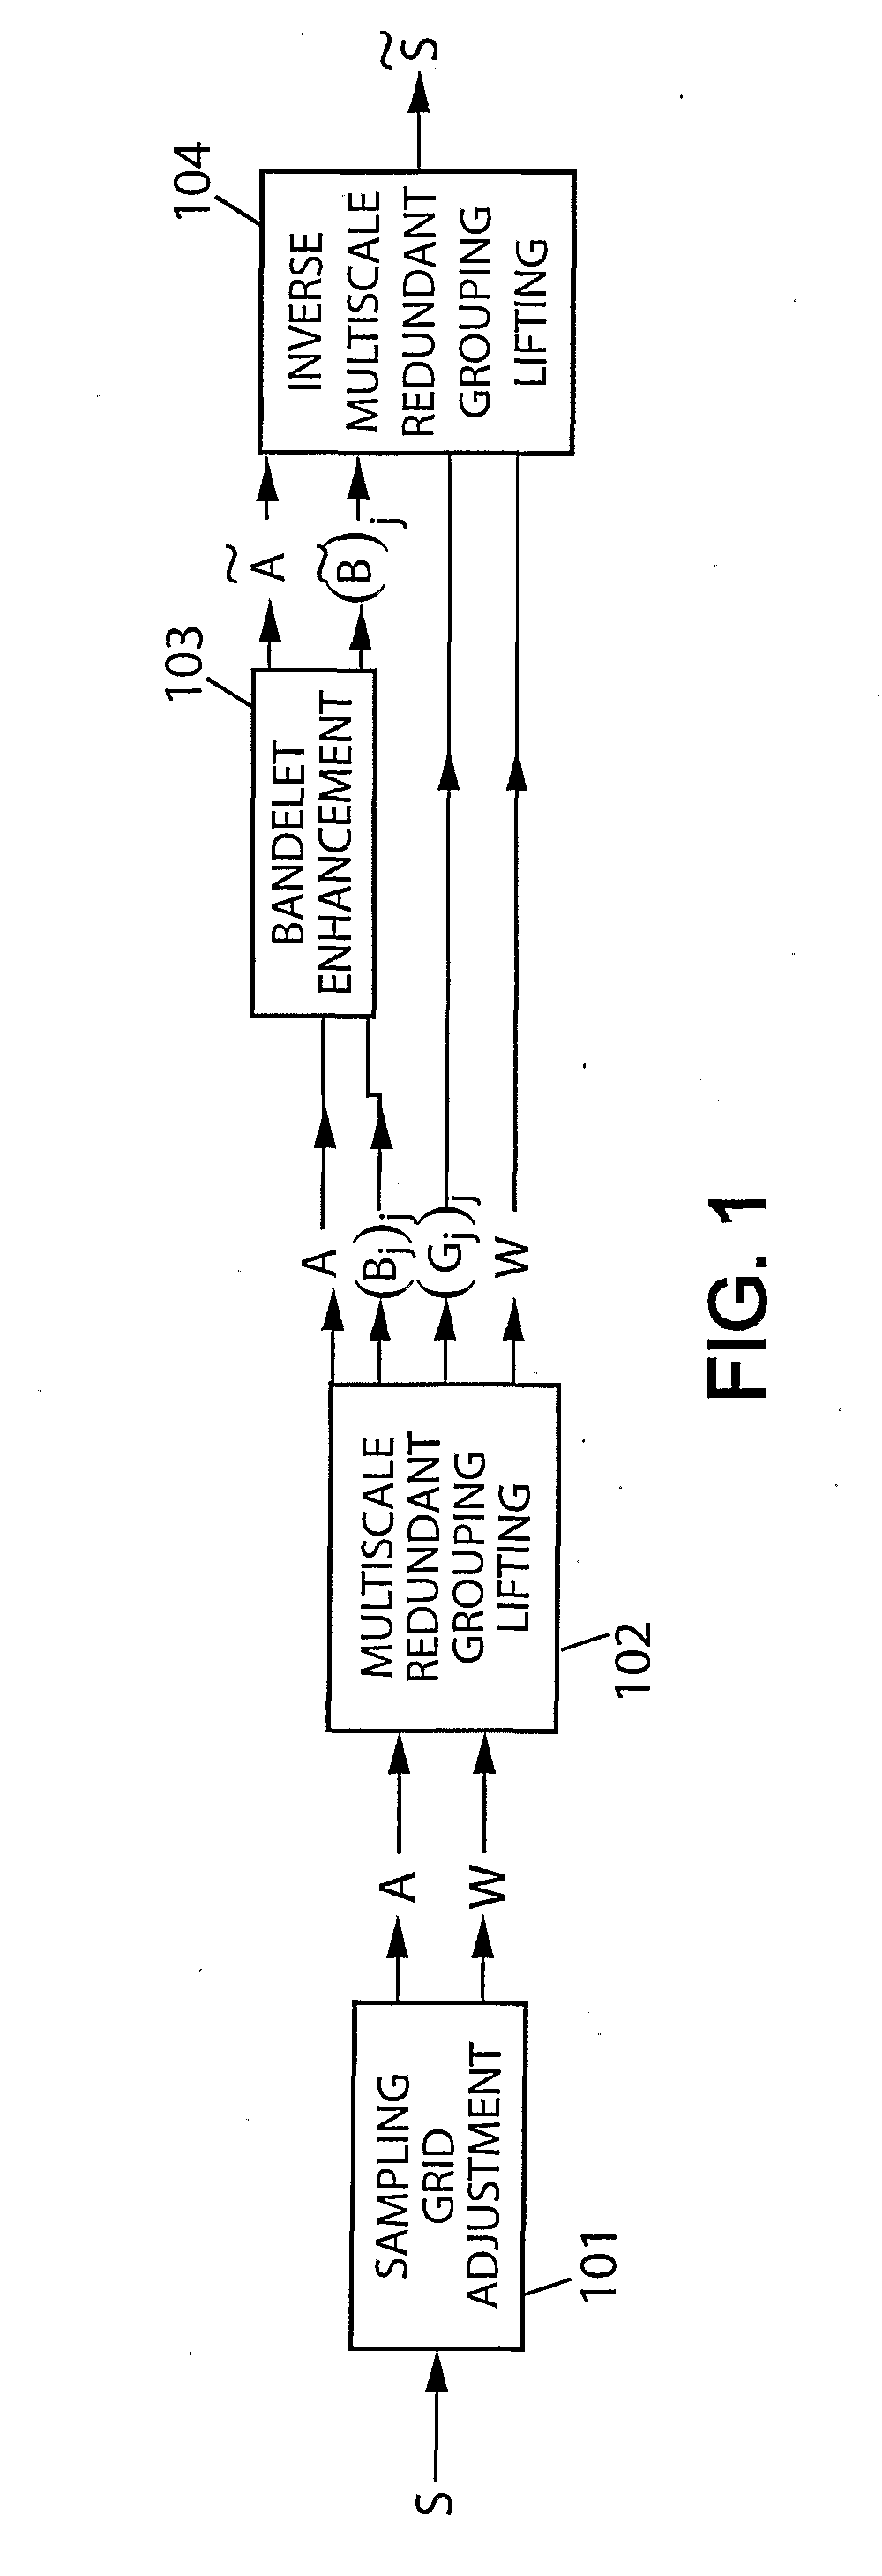 Method and apparatus for enhancing signals with multiscale grouping bandelets